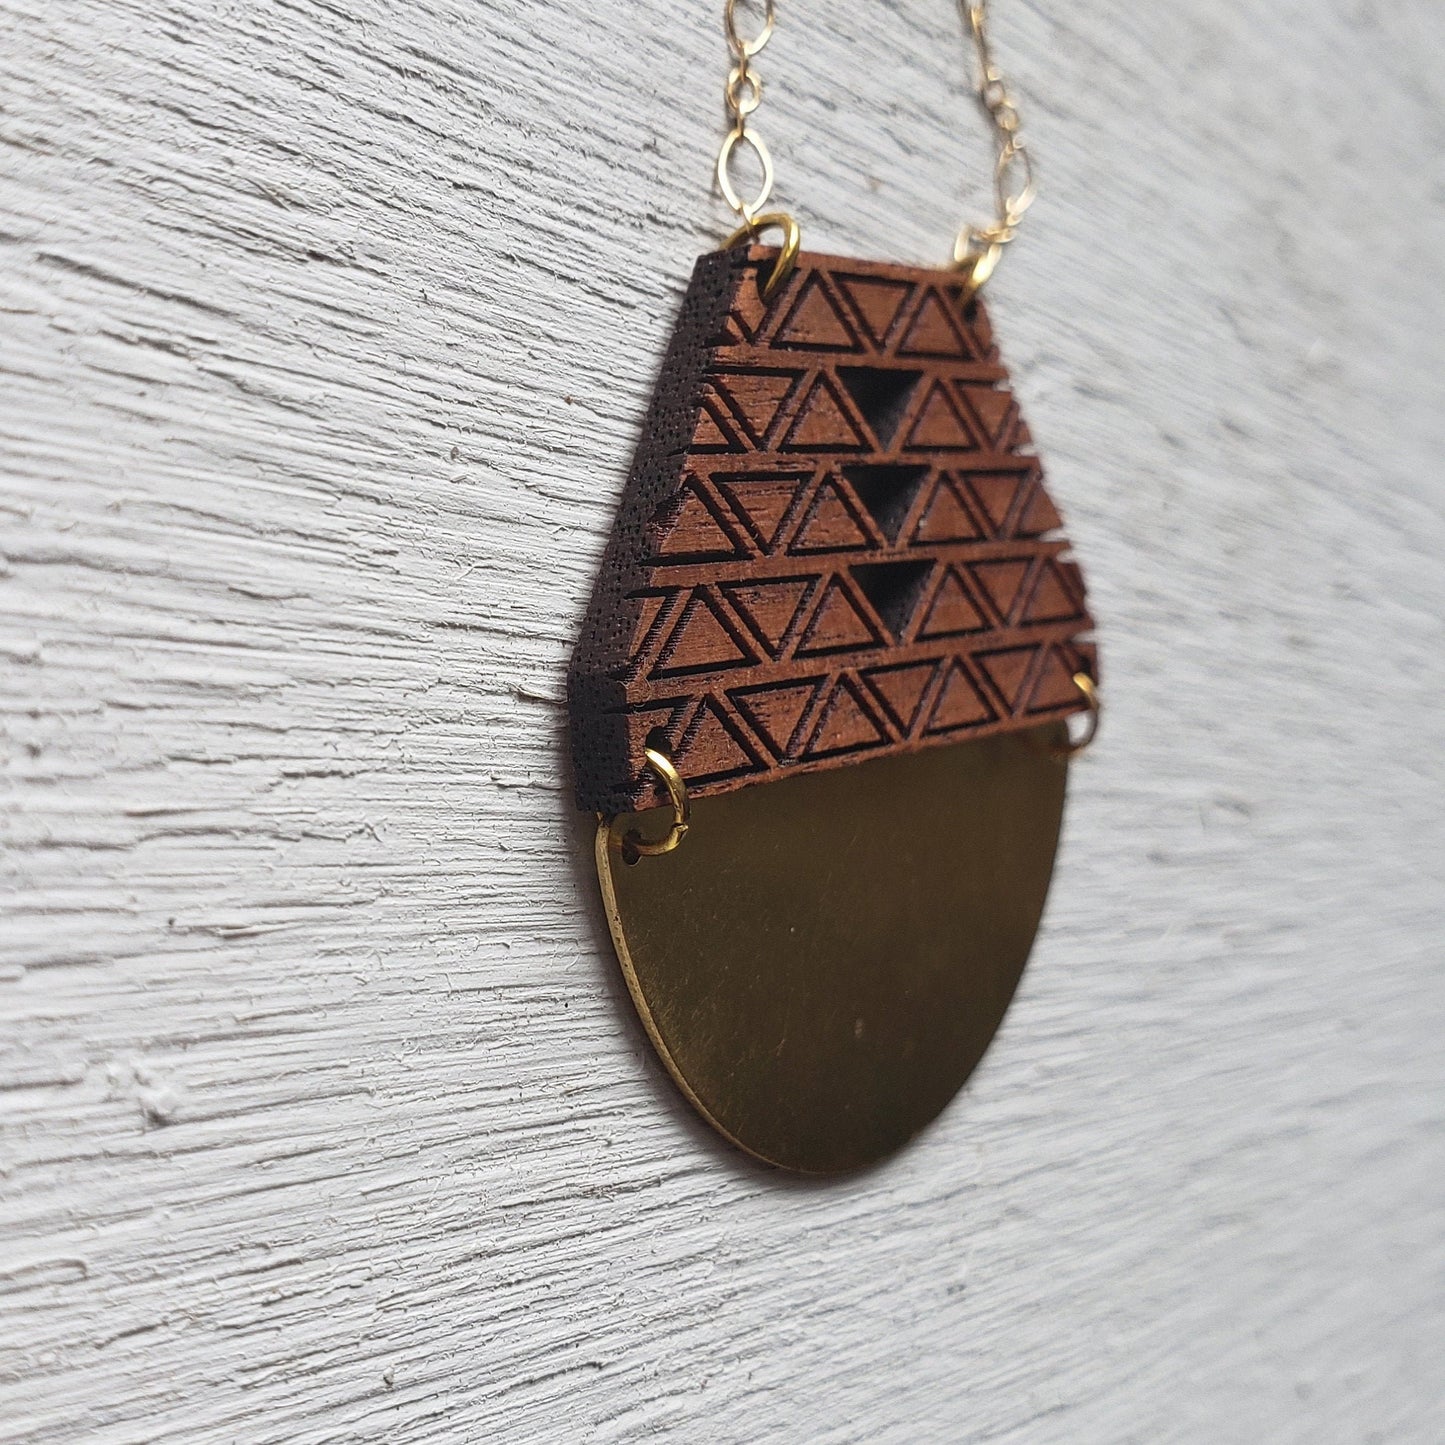 Modern Southwestern necklace - Laser Cut Wood Necklace || Geometric Jewelry - Gift for Wife, Gift for Women